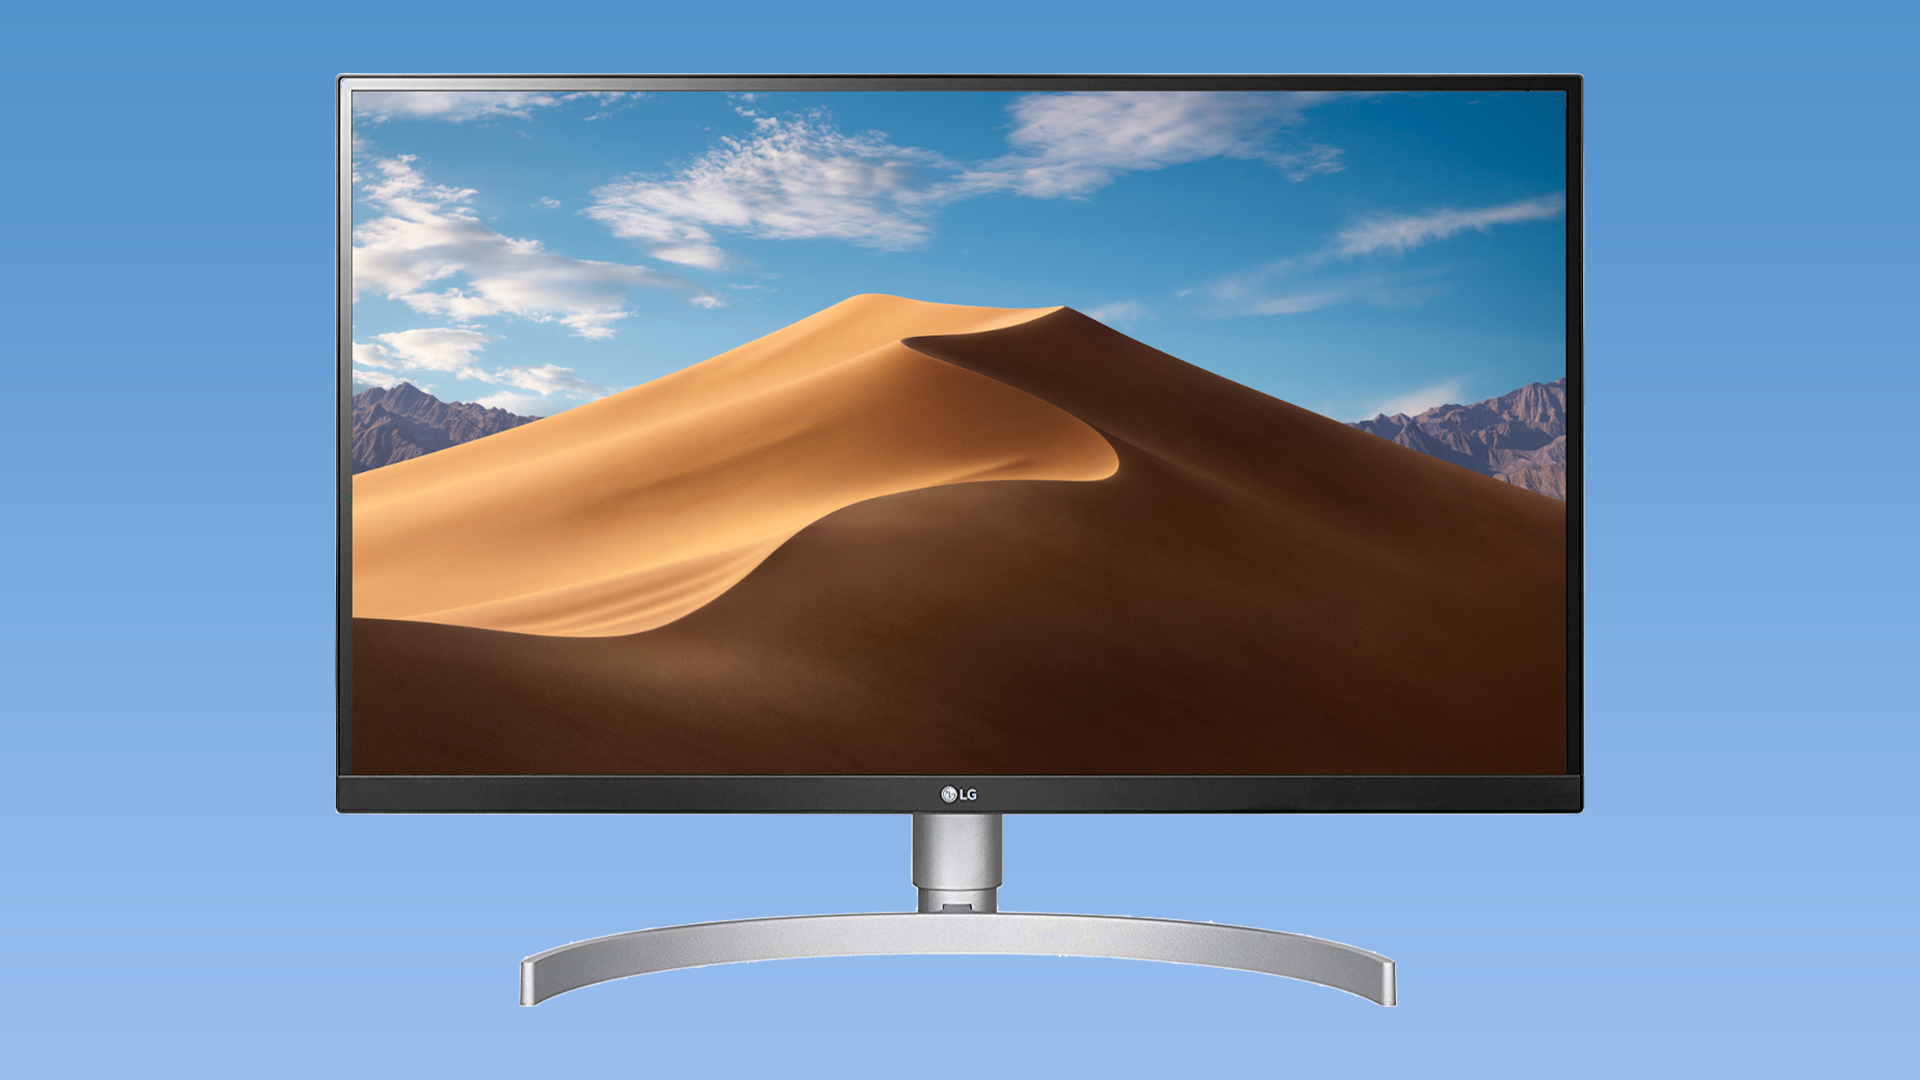 REVIEW: 4K Monitor LG 27UL650 provides very high quality for work and games